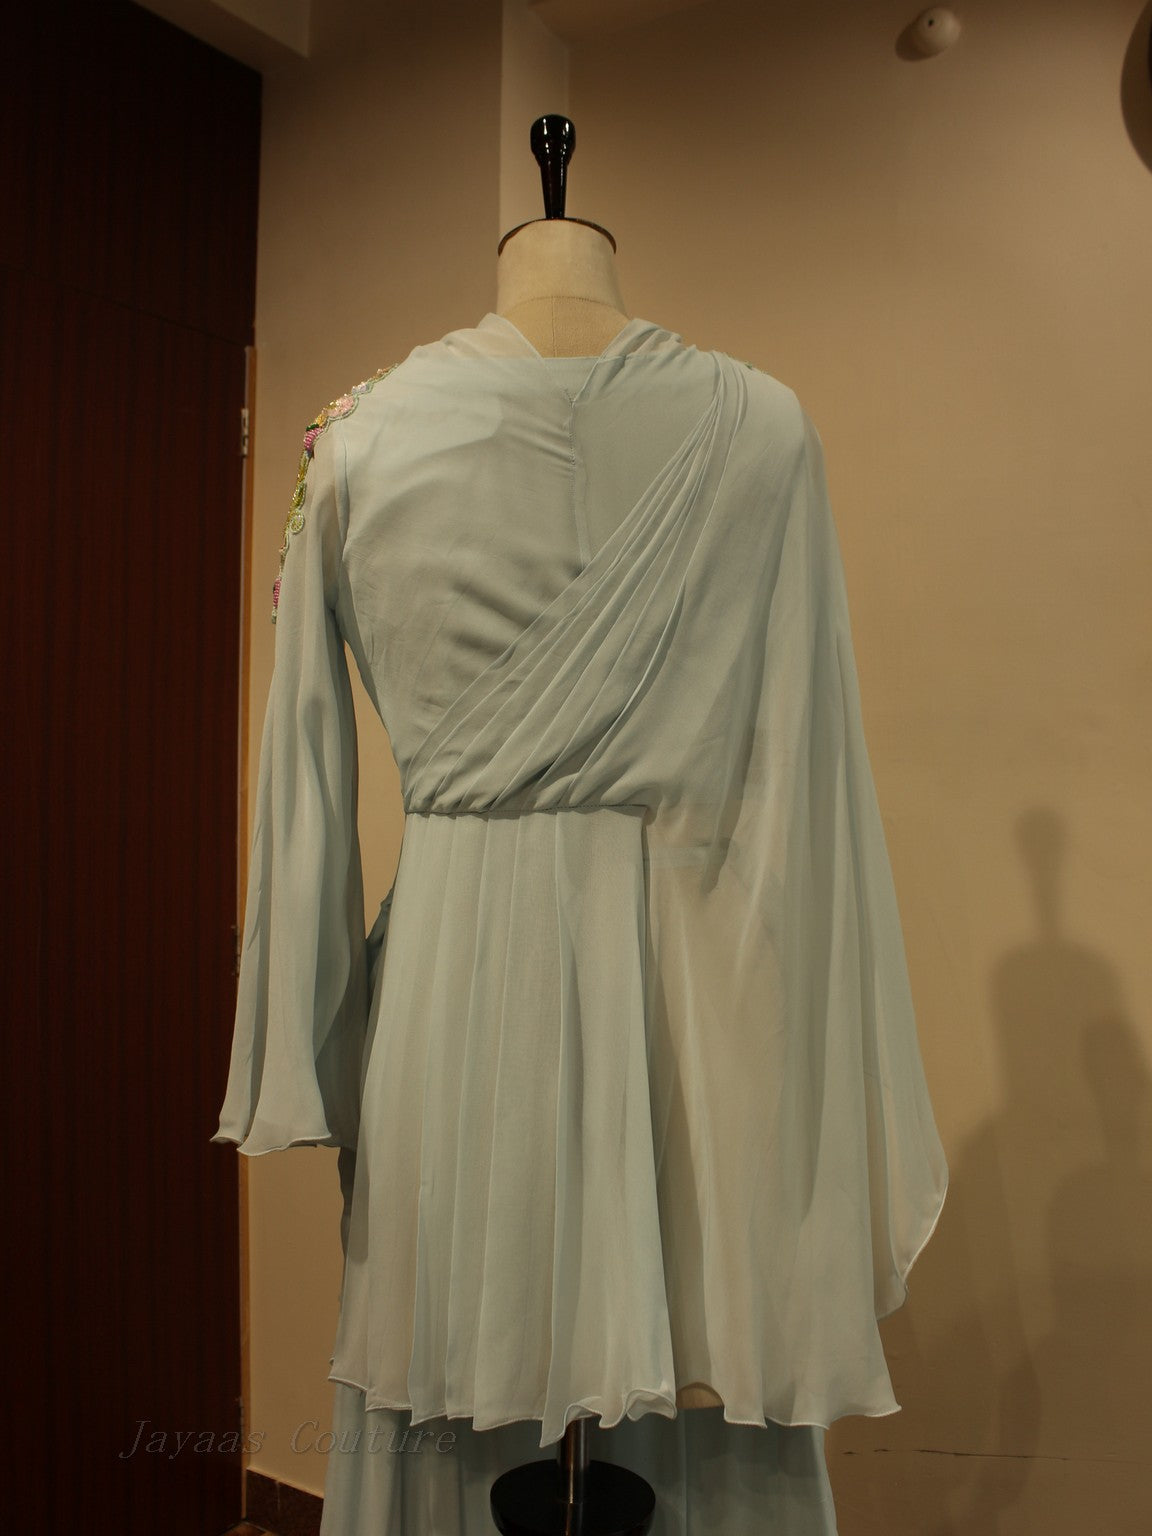 Powder blue Drape top with flaired pants